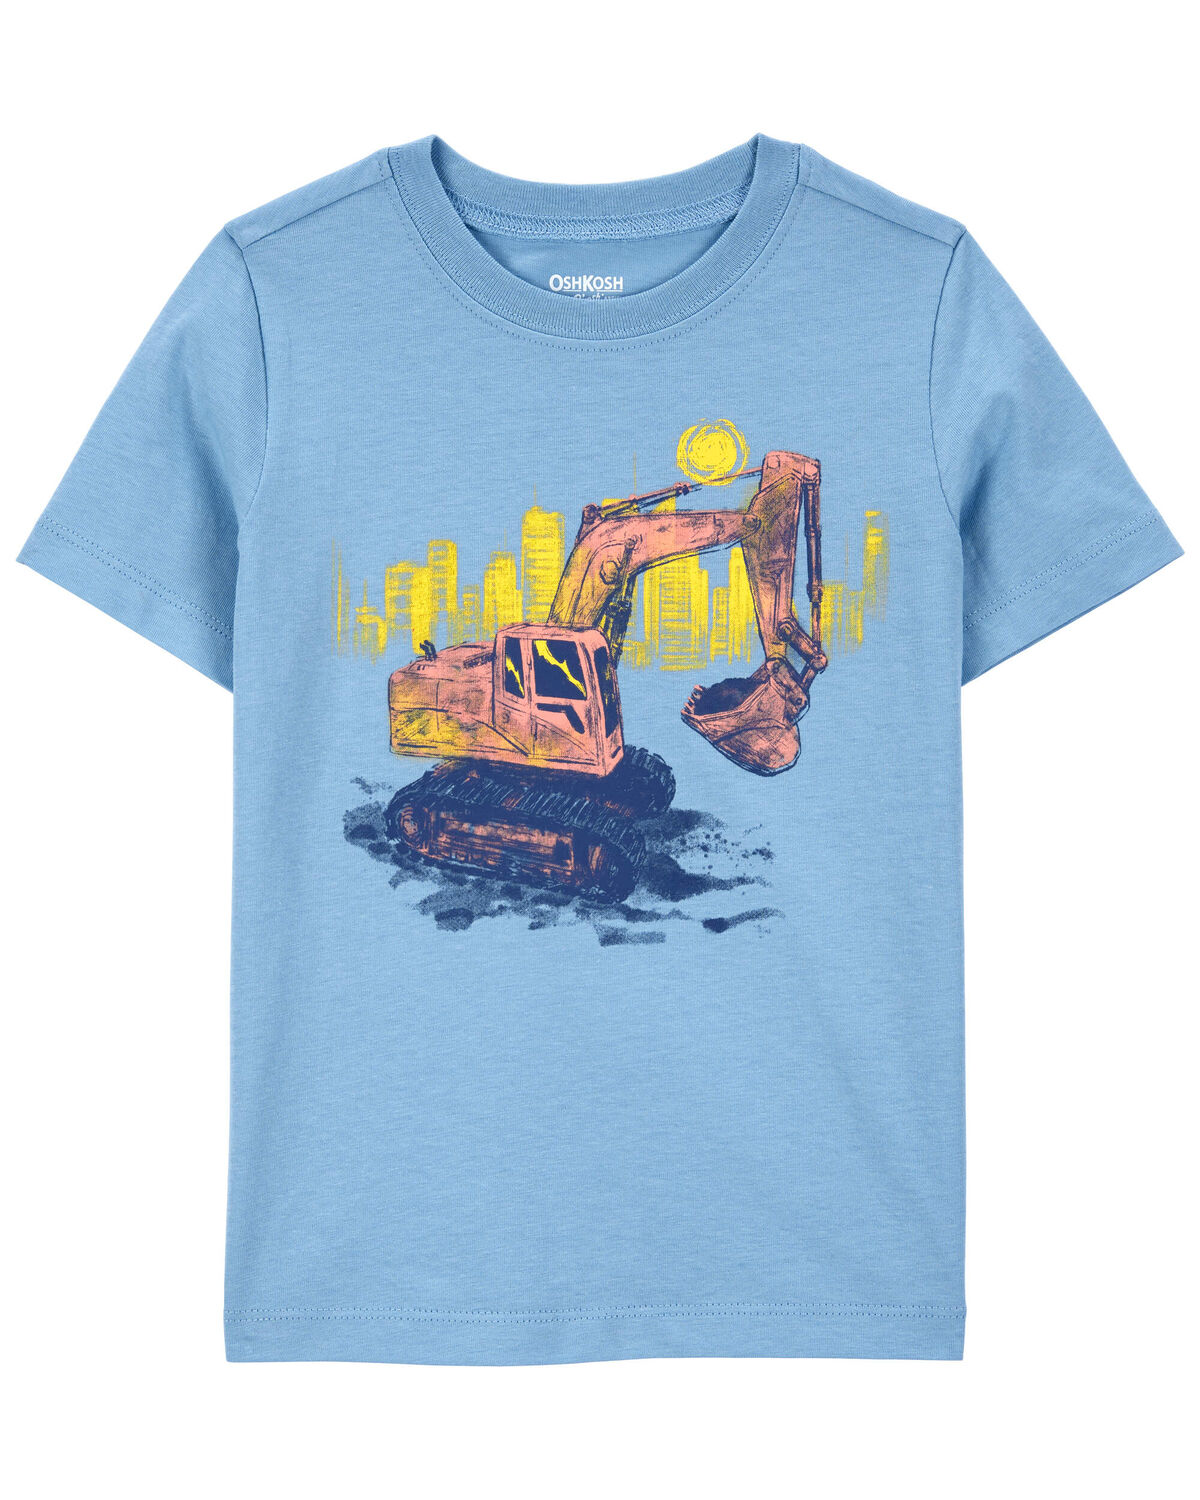 Toddler Demo Graphic Tee